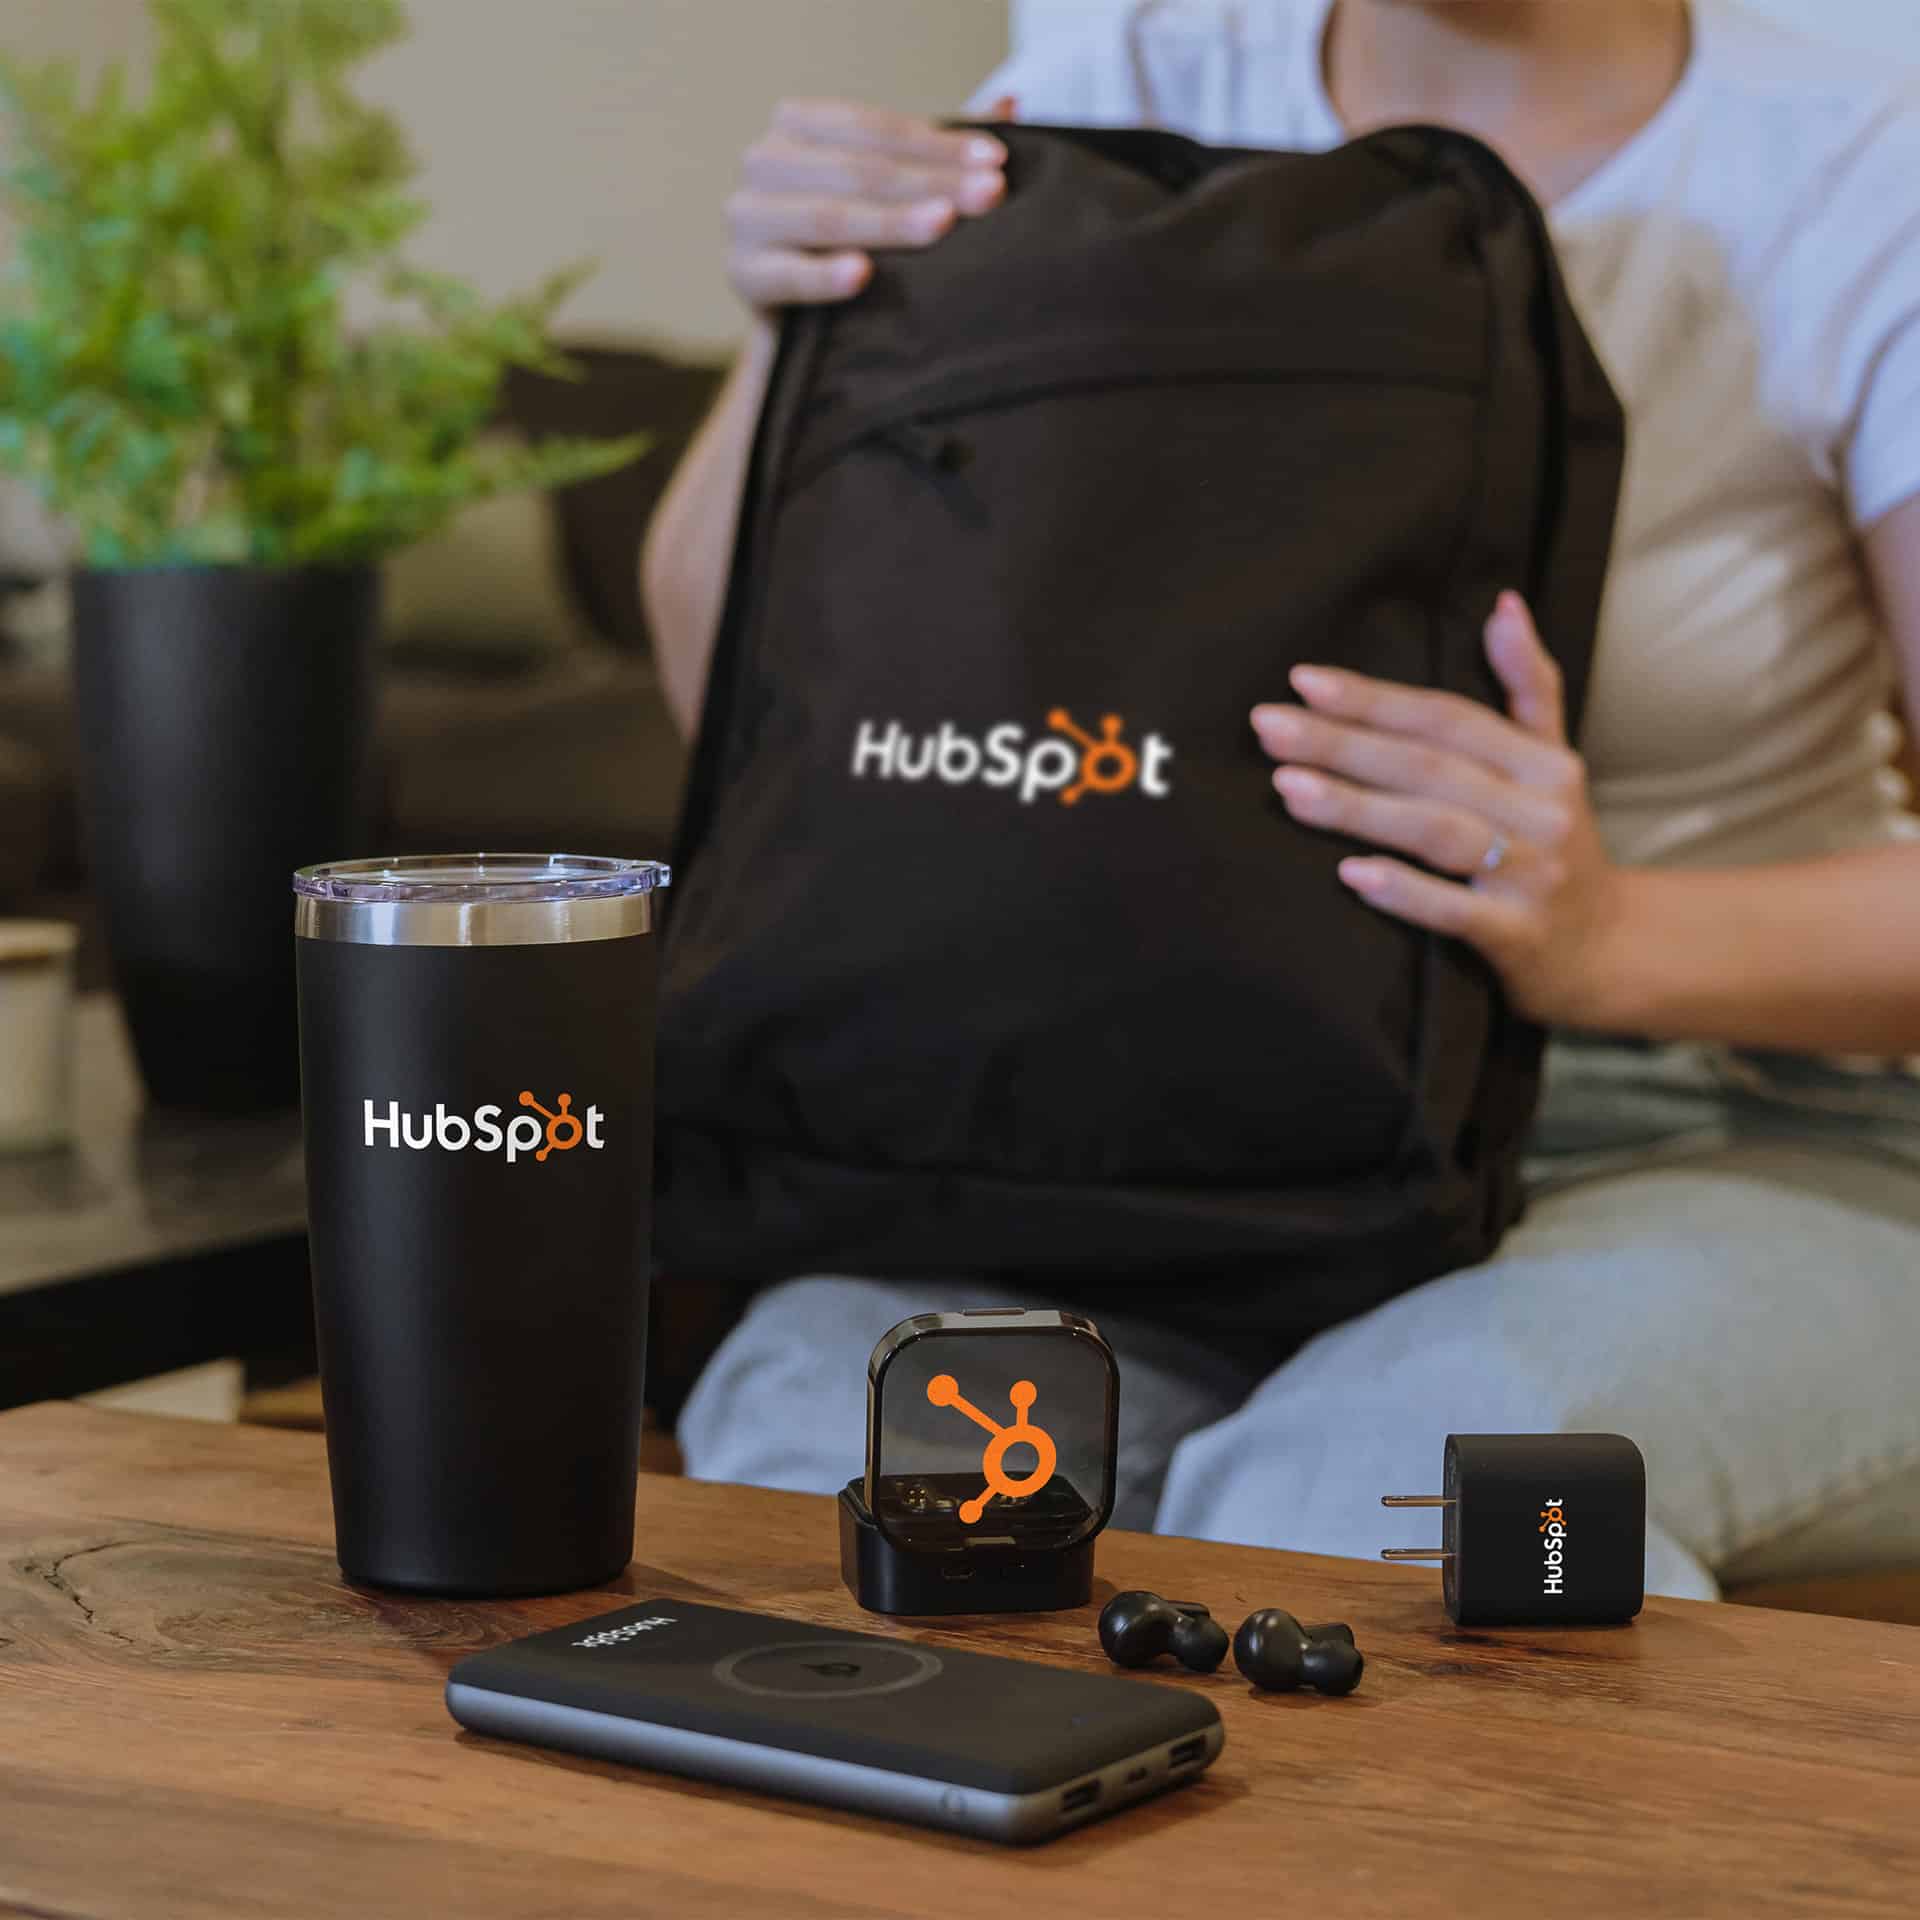 A woman is sitting on a couch with a HubSpot branded promotional products backpack and phone.